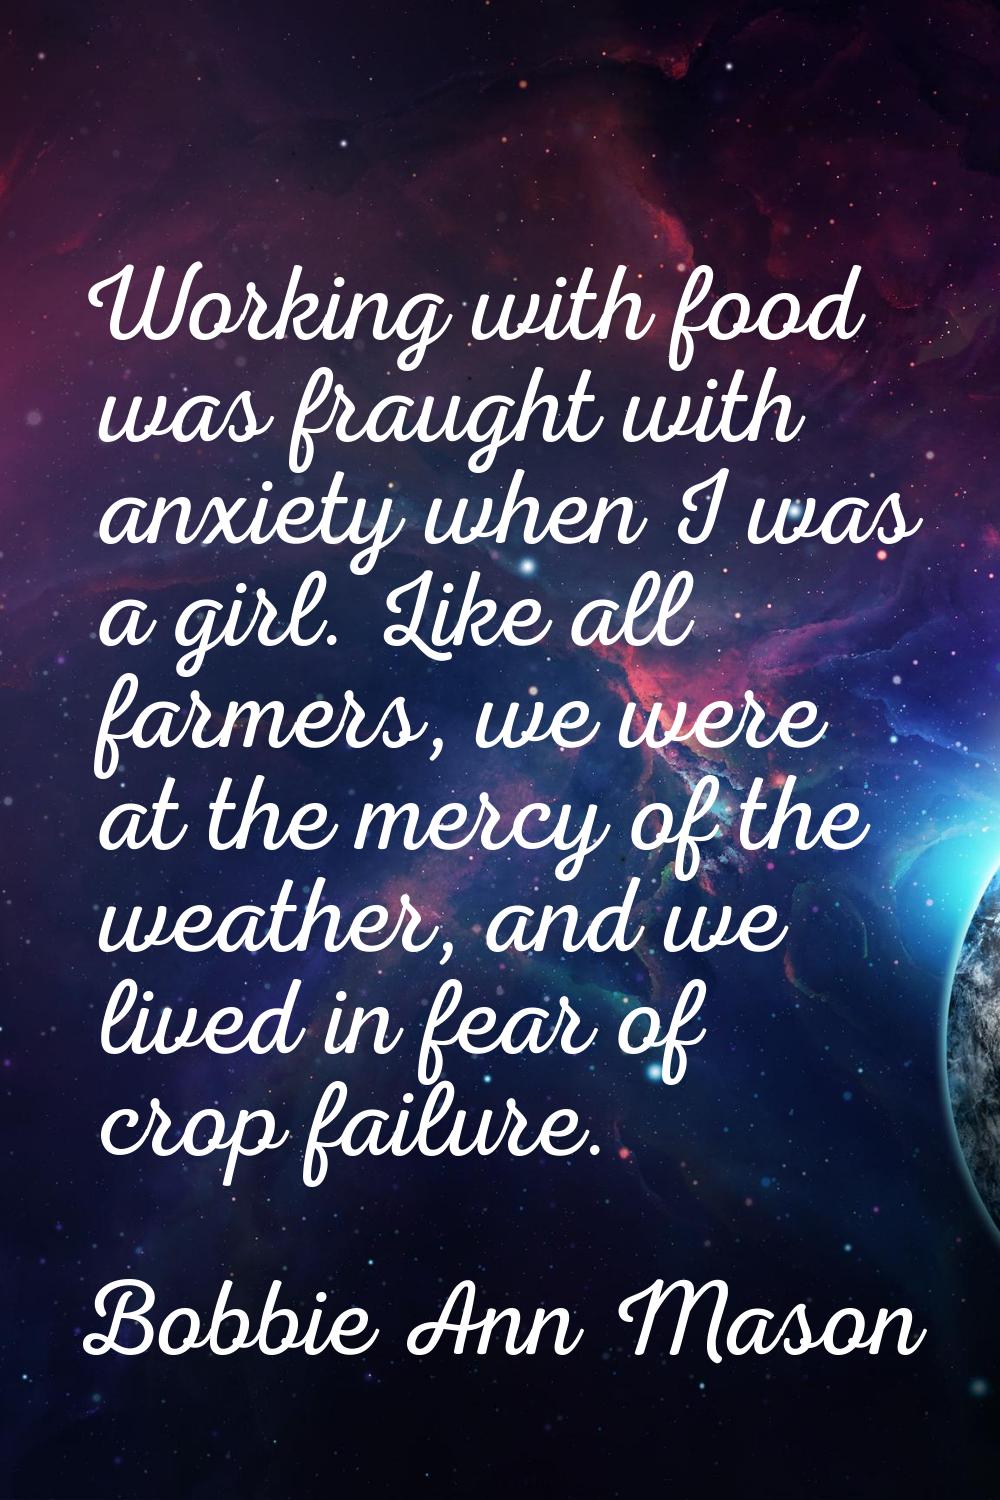 Working with food was fraught with anxiety when I was a girl. Like all farmers, we were at the merc